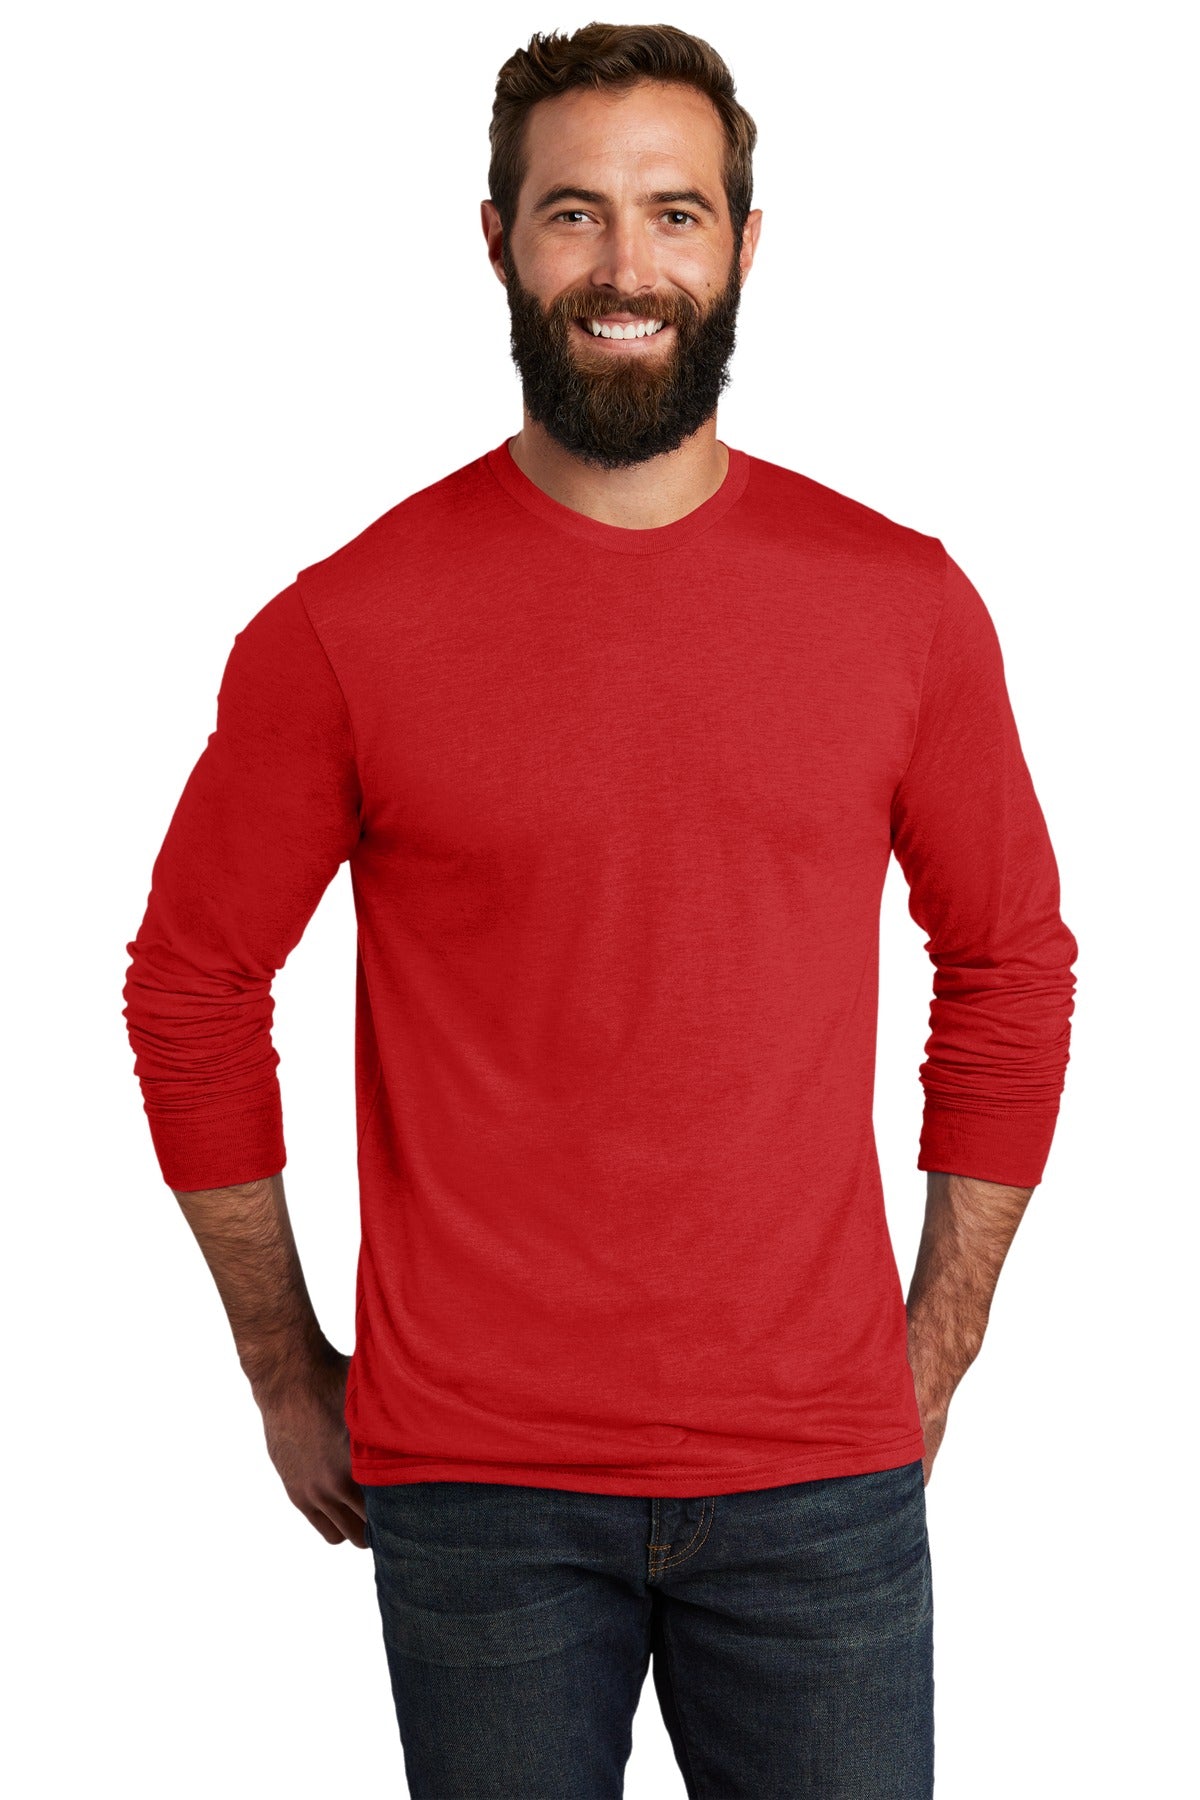 Allmade ® Unisex Tri-Blend Long Sleeve Tee AL6004 [Rise Up Red] - DFW Impression